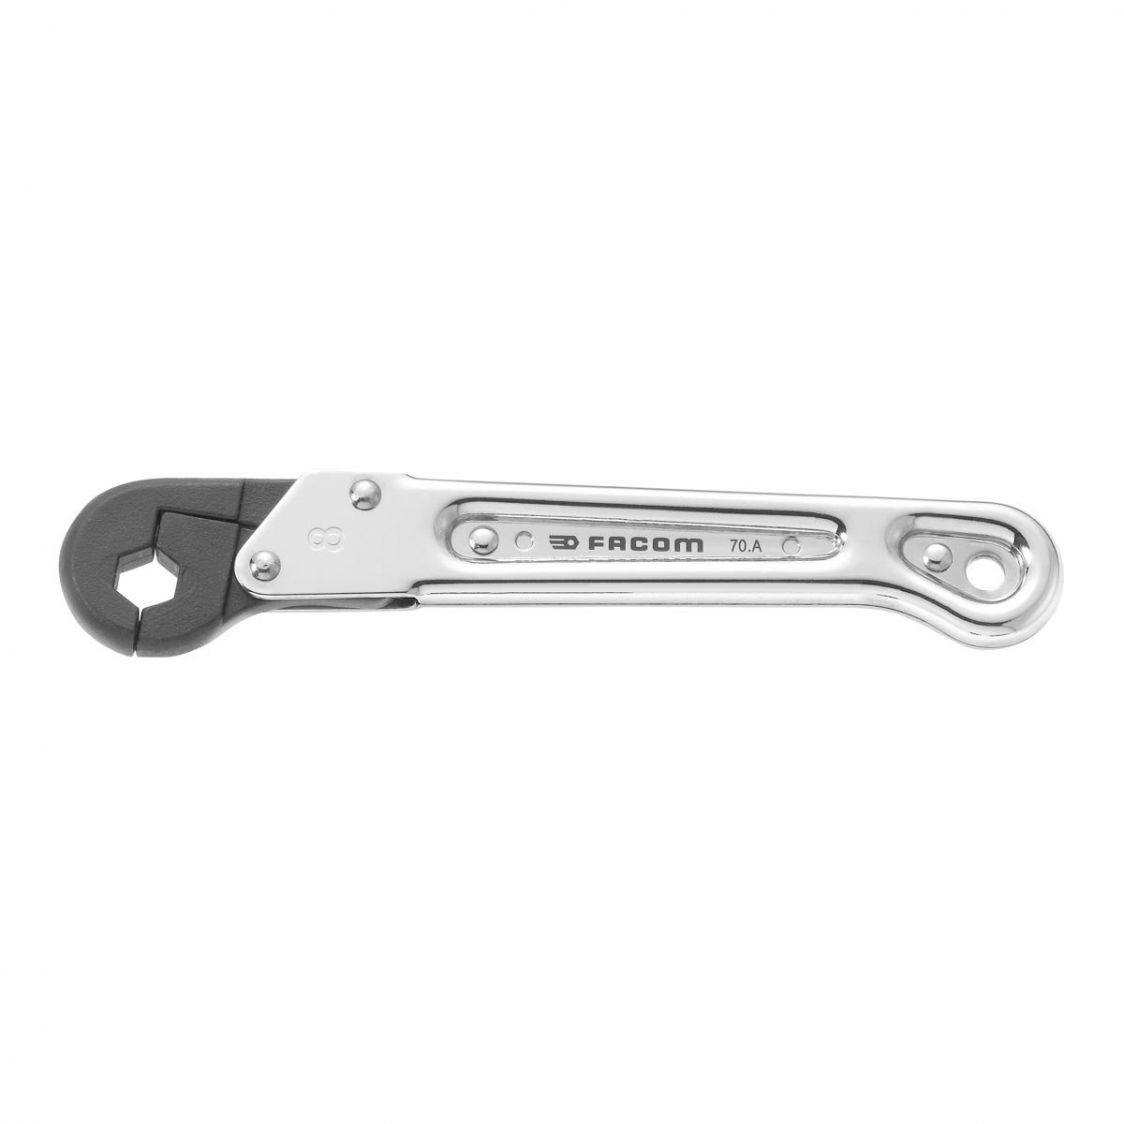 FACOM 70A.22 - 22mm Metric Ratchet Flare Nut Spanner